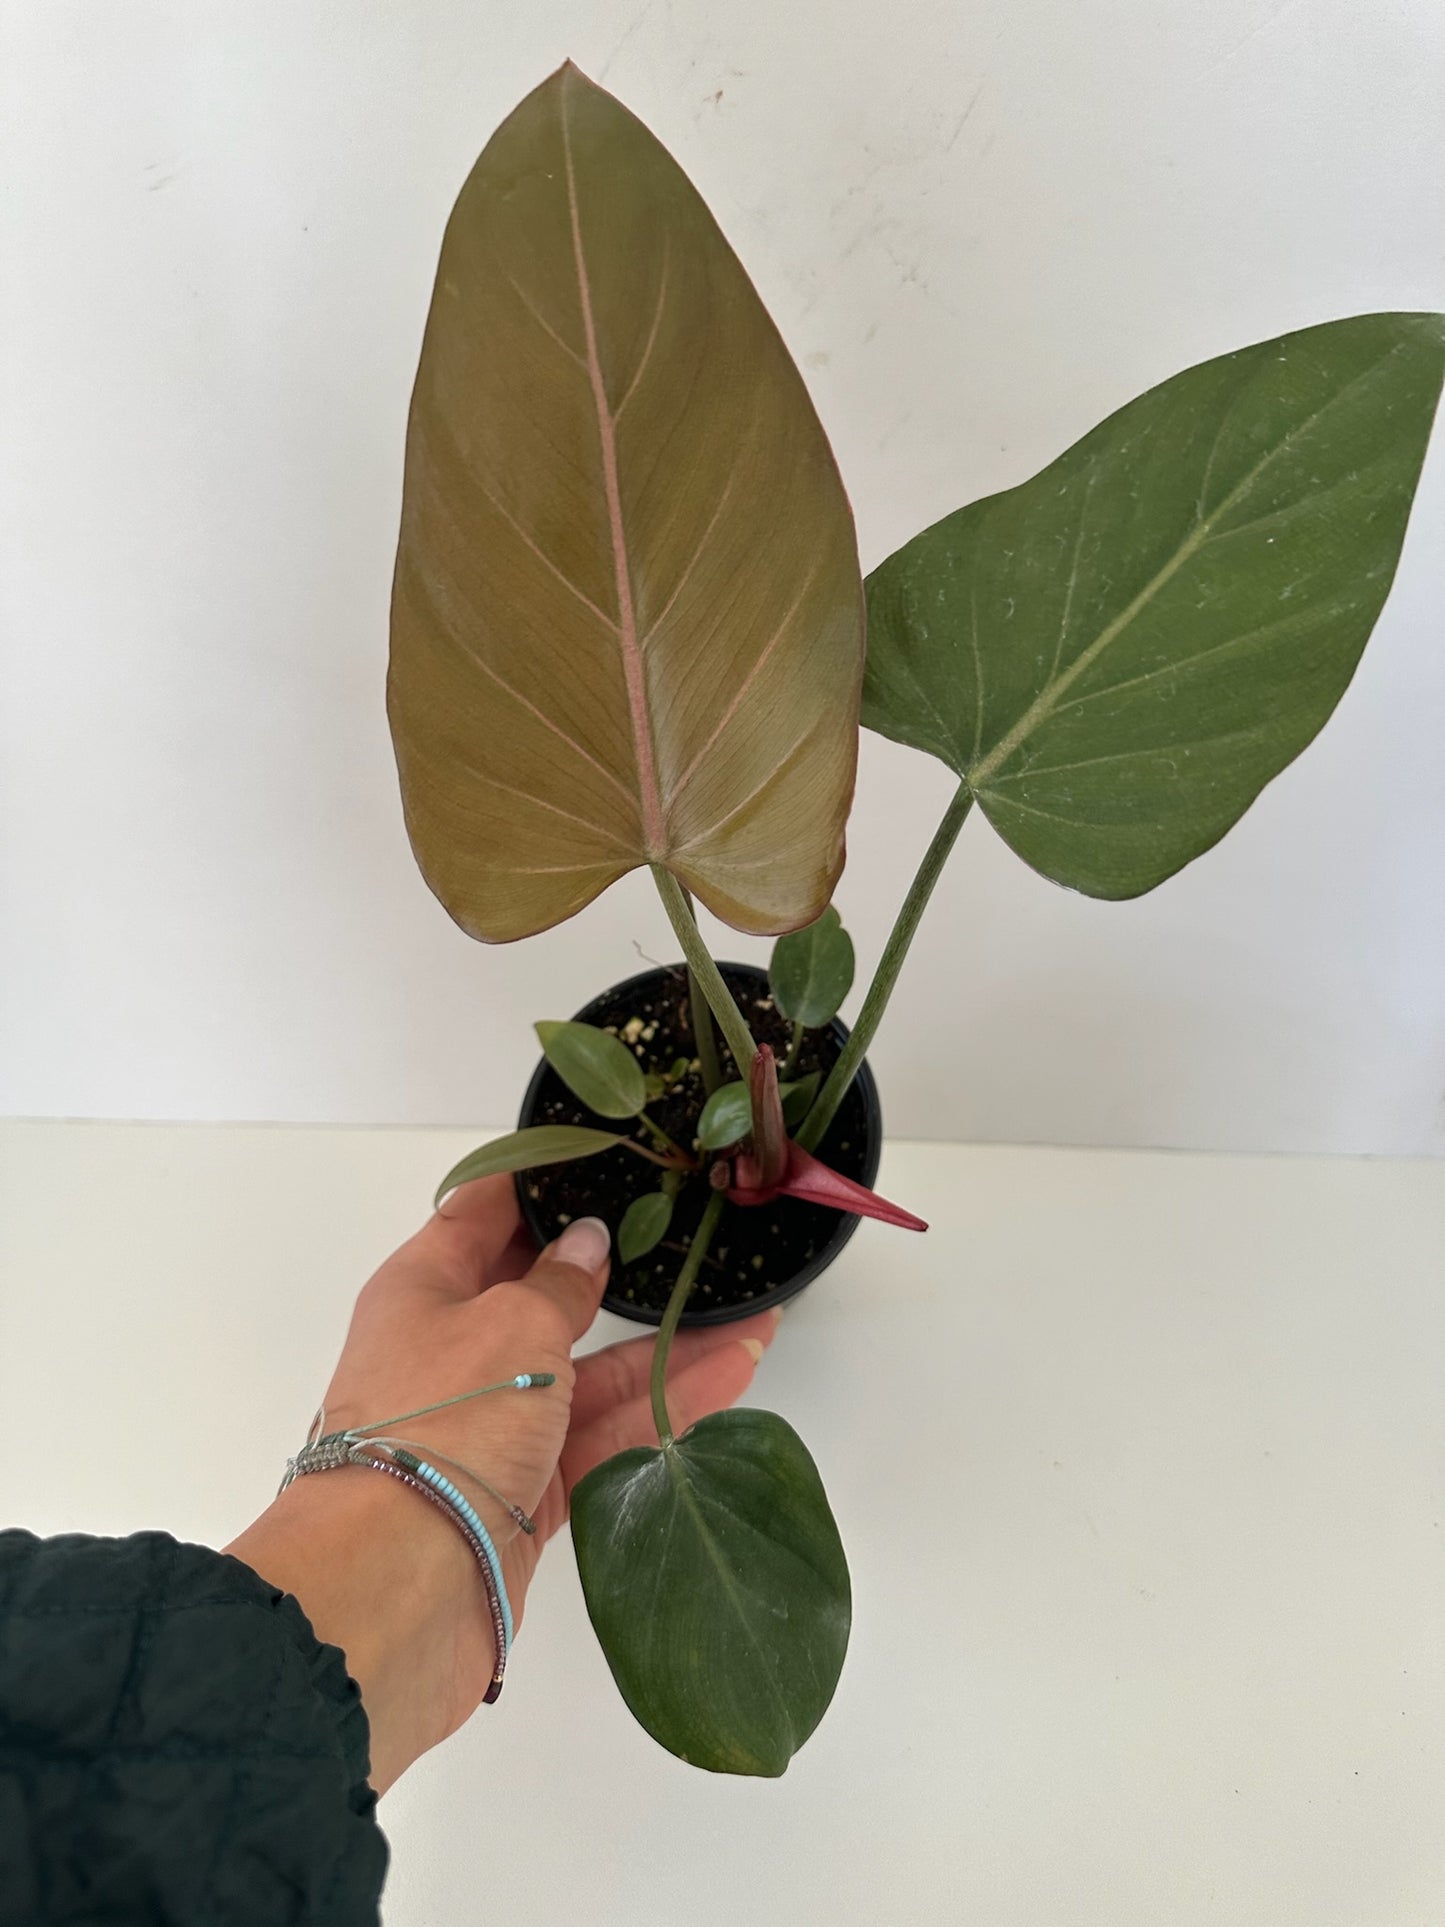 Philodendron 'Summer Glory'  - Gloriosum x McColleys Red Hybrid - Tropical Houseplant